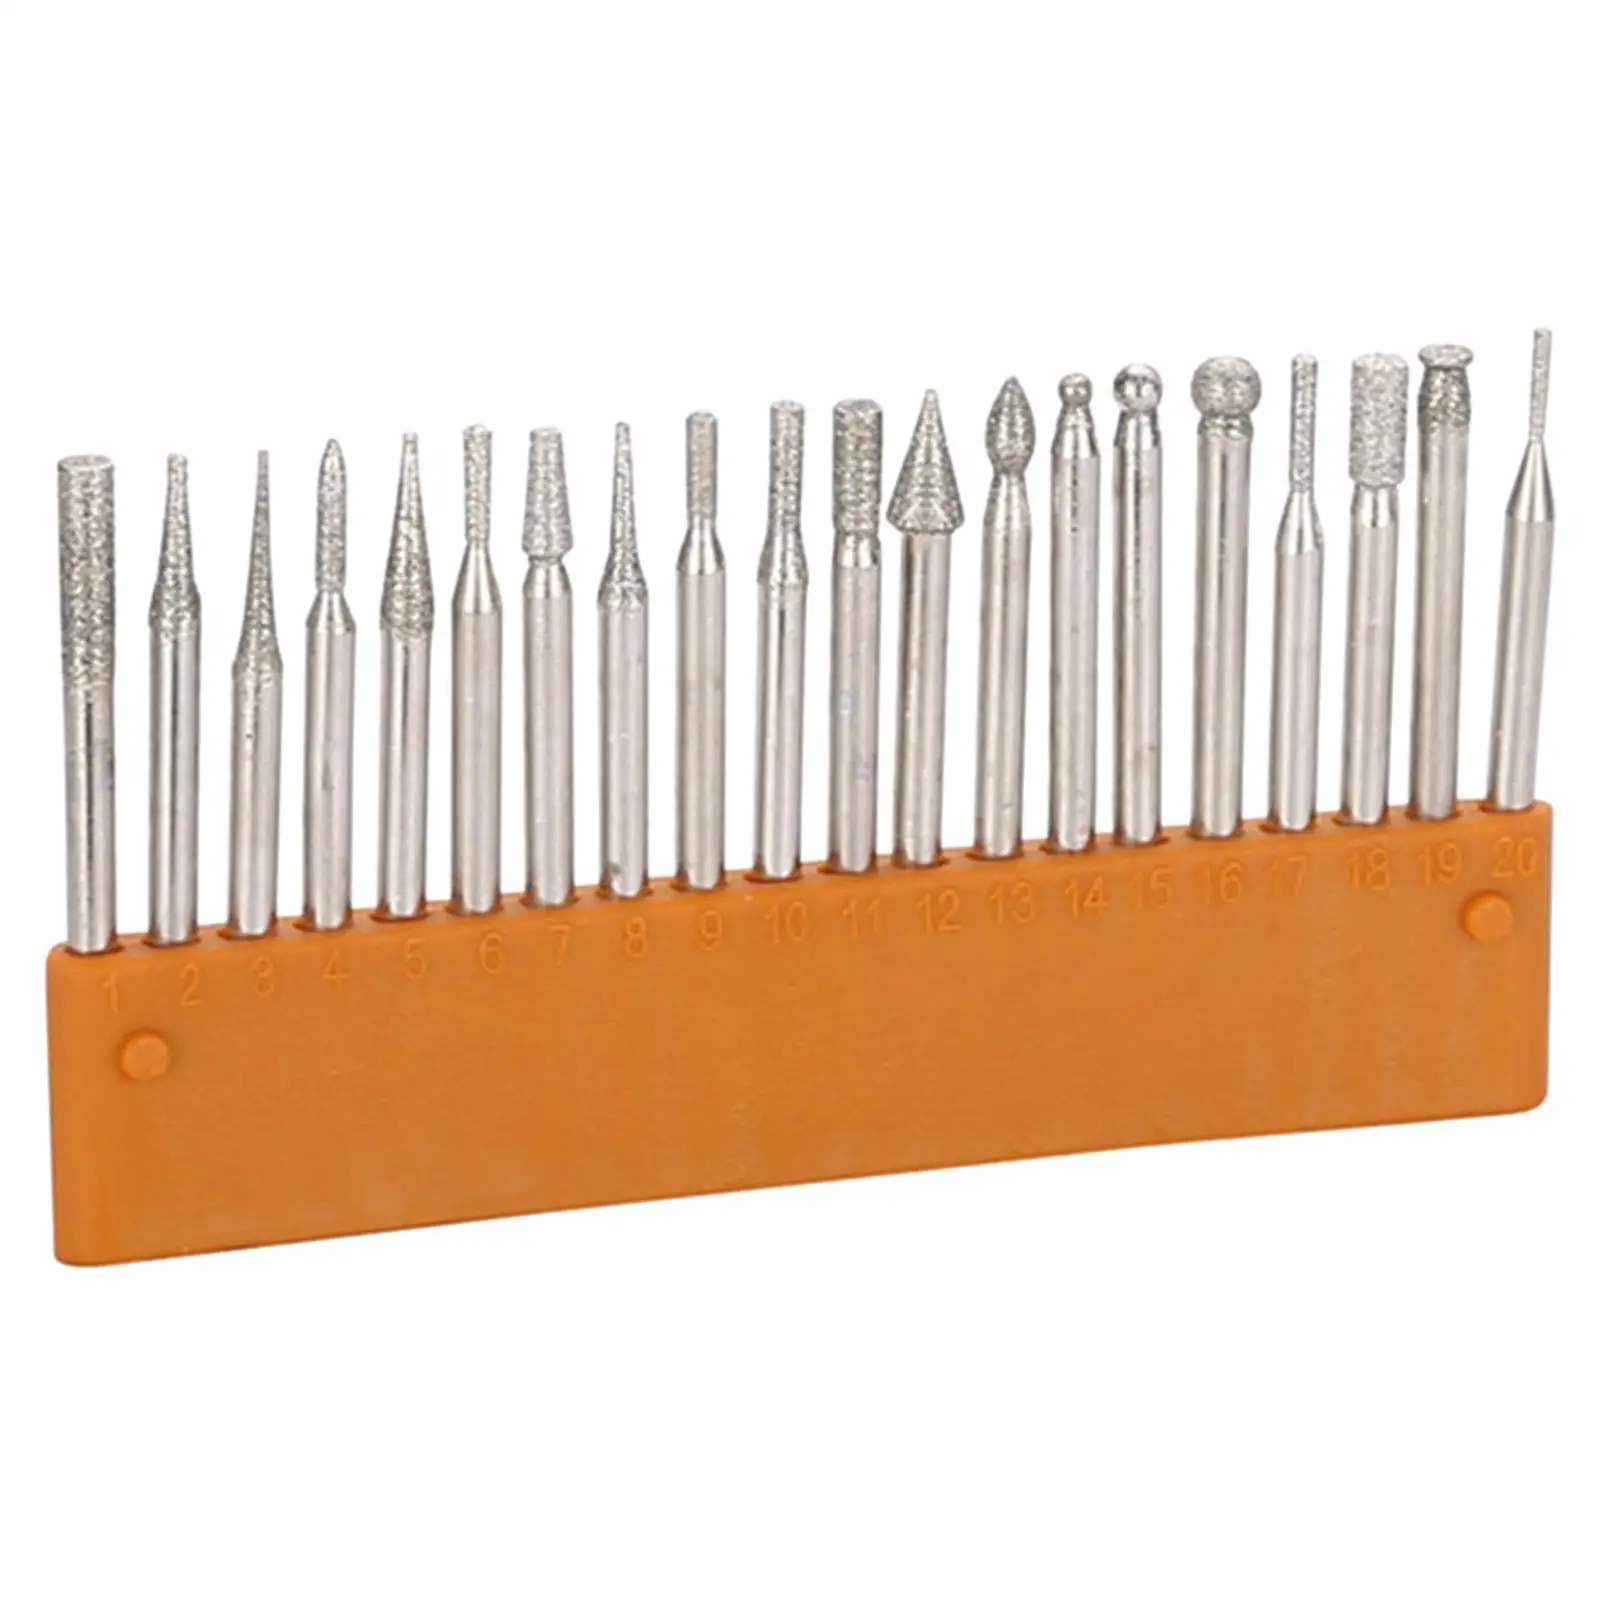 

20 Pieces 3mm Shank Diamond Burr Drill Bit Set Accessories Polishing Rotary Point Head for Engraving Carving Grinding